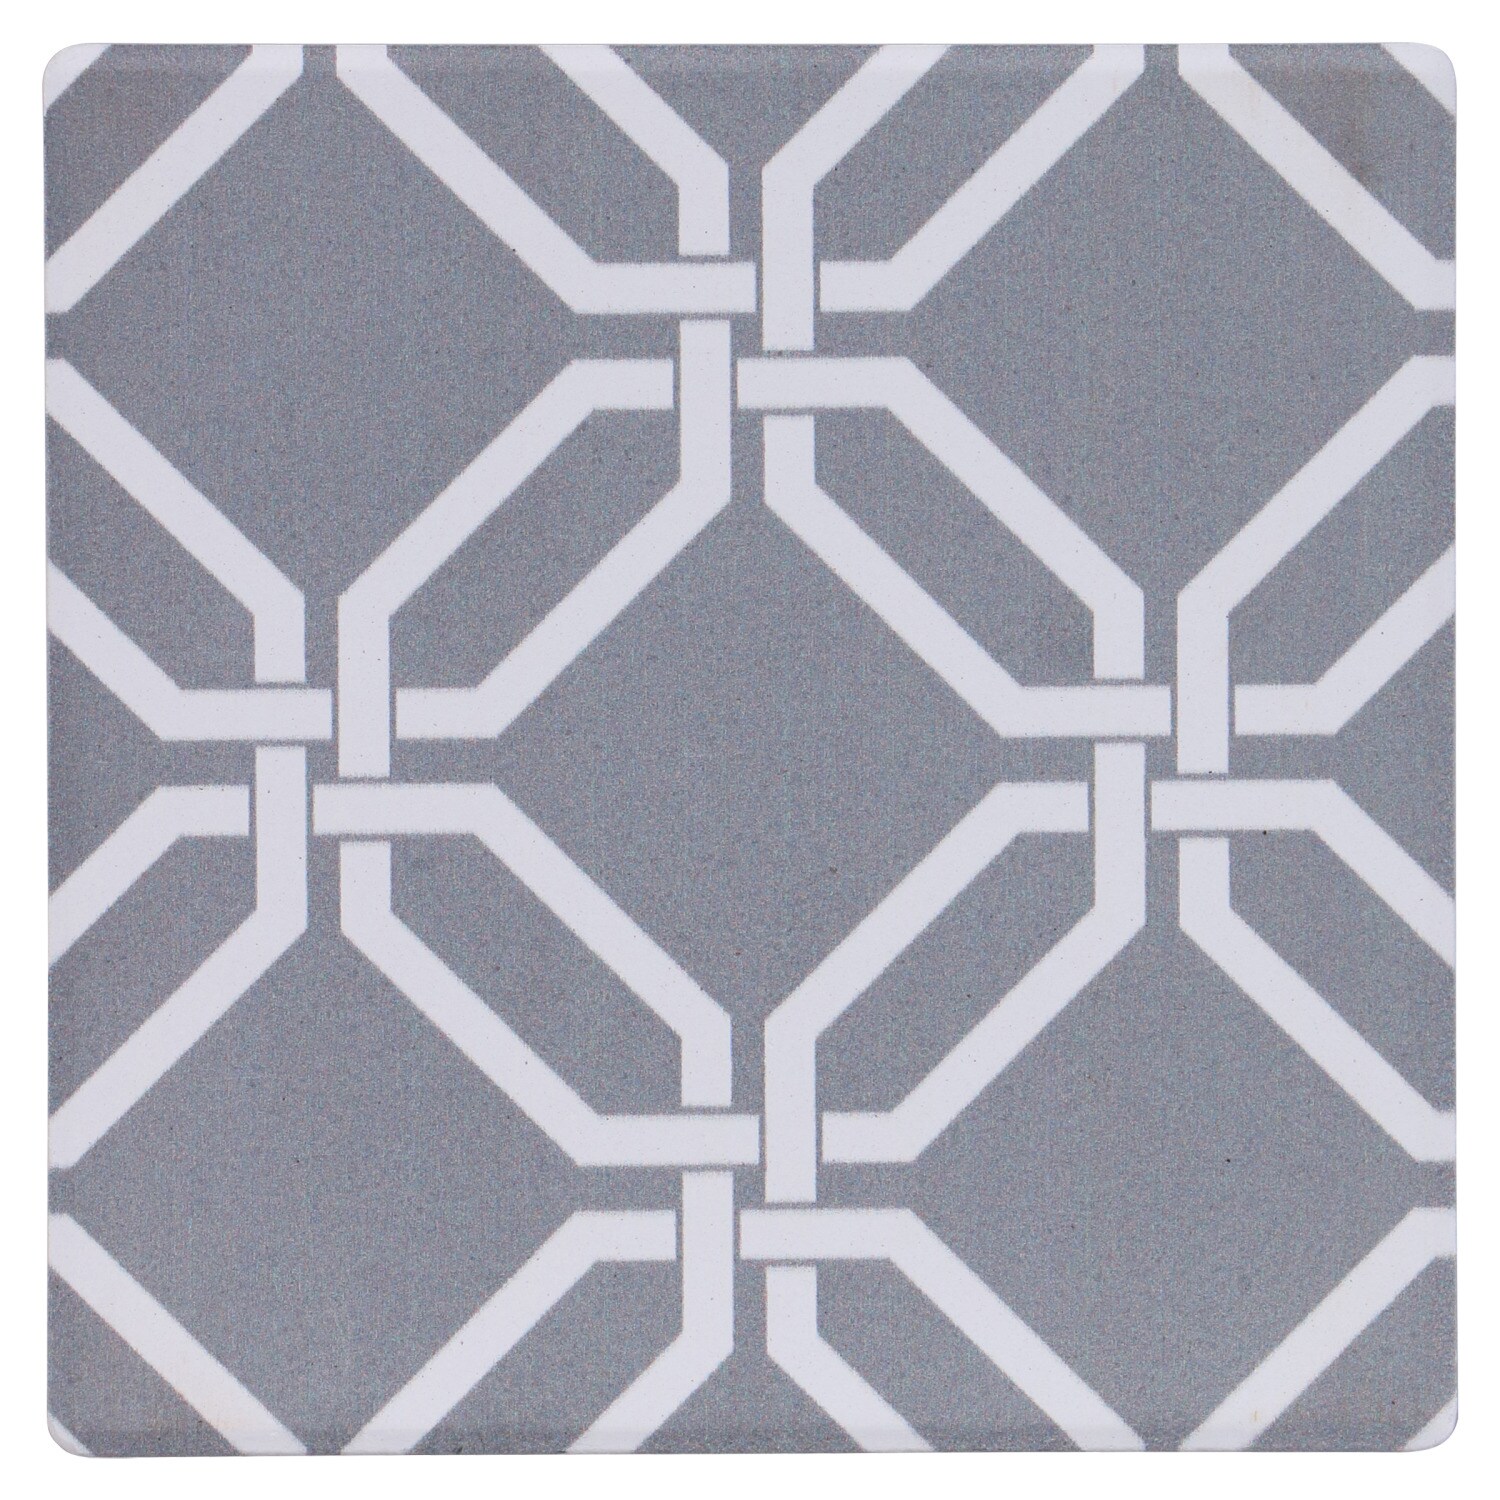 Lattice Home Décor Accent Absorbent Coasters for Drinks 